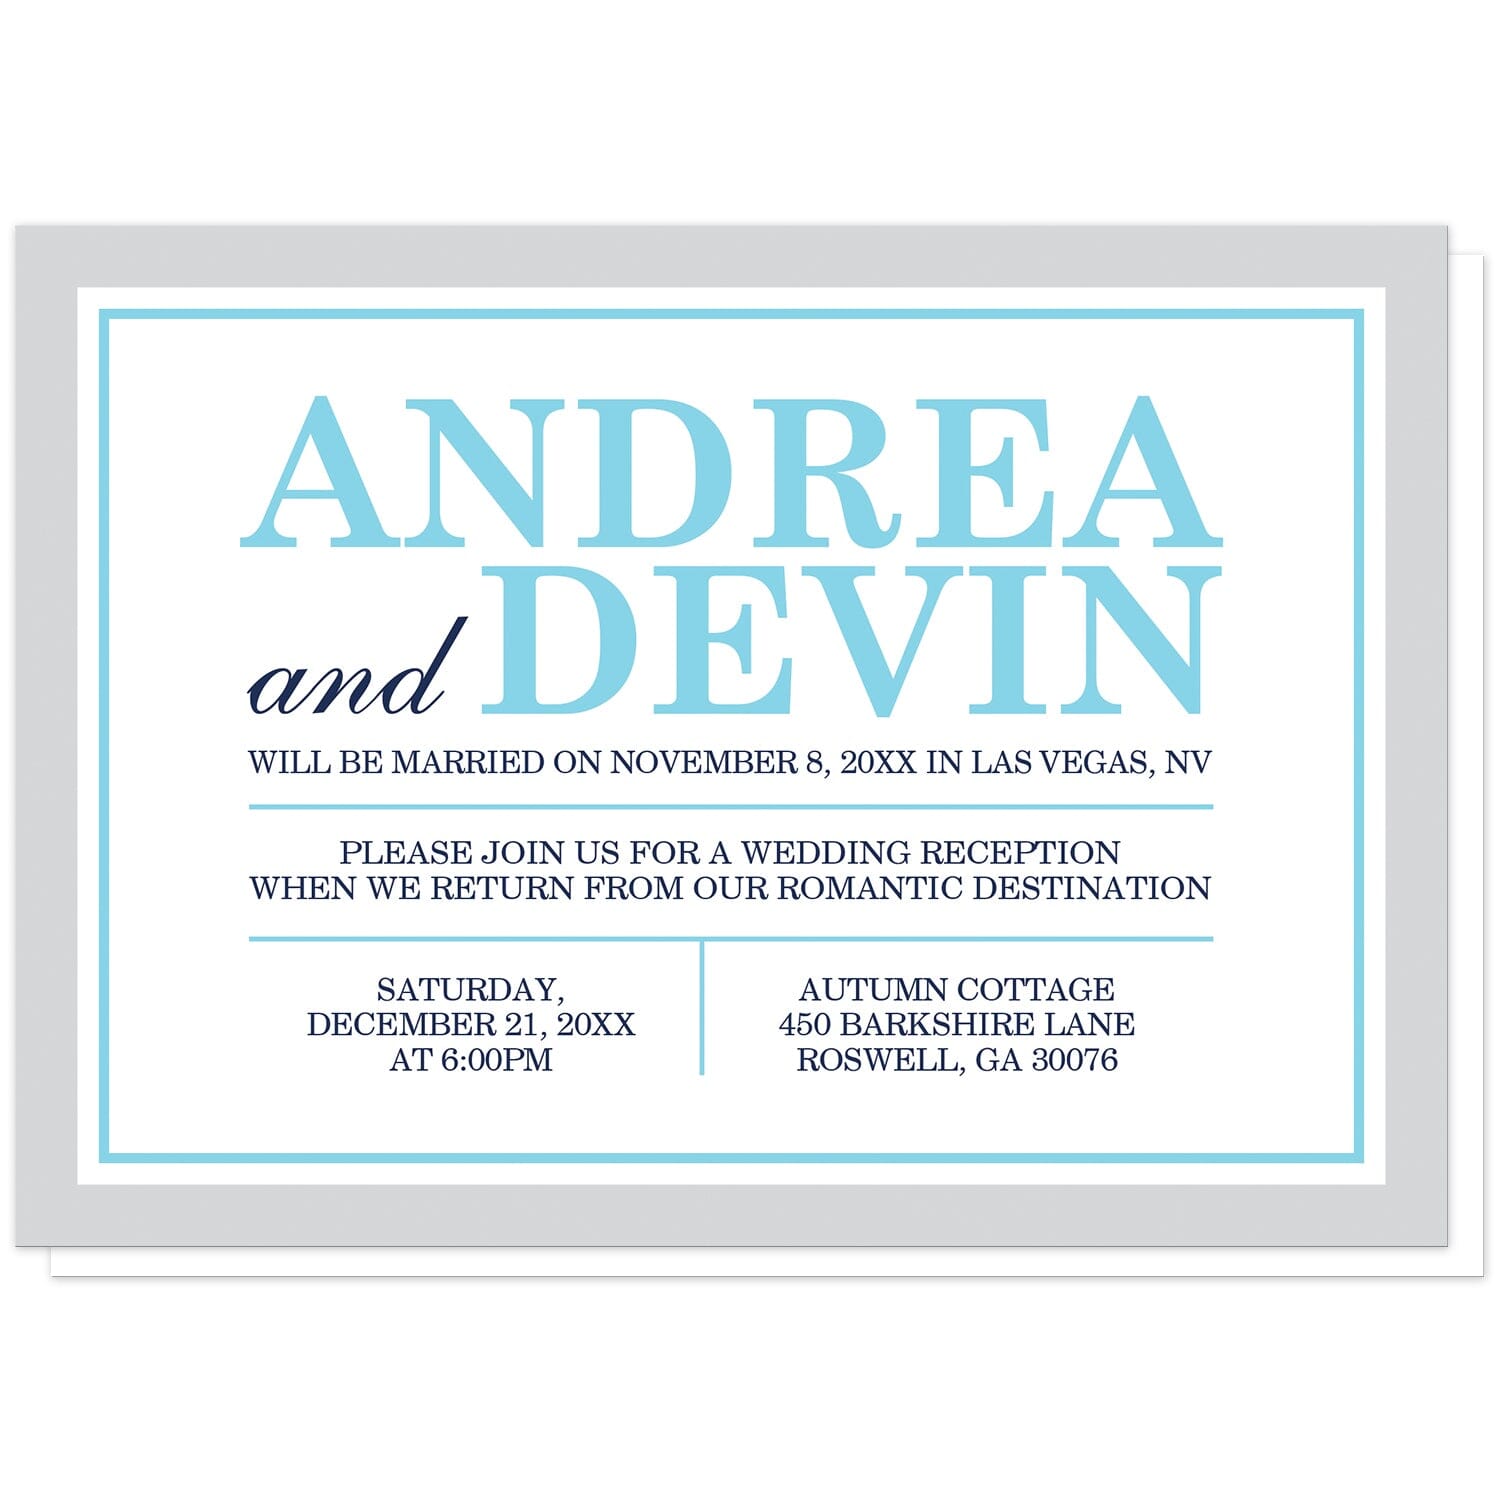 Aqua Navy Gray Winter Reception Only Invitations at Artistically Invited. Aqua navy gray winter reception only invitations with a simple minimalist aqua blue, navy blue, and light gray typography design. Your personalized reception only invitation details are custom printed in aqua and navy blue. The edge of these invitations has a gray and aqua blue border. They're perfect for winter wedding receptions and for wedding celebrations that have an aqua, navy, and gray color scheme.